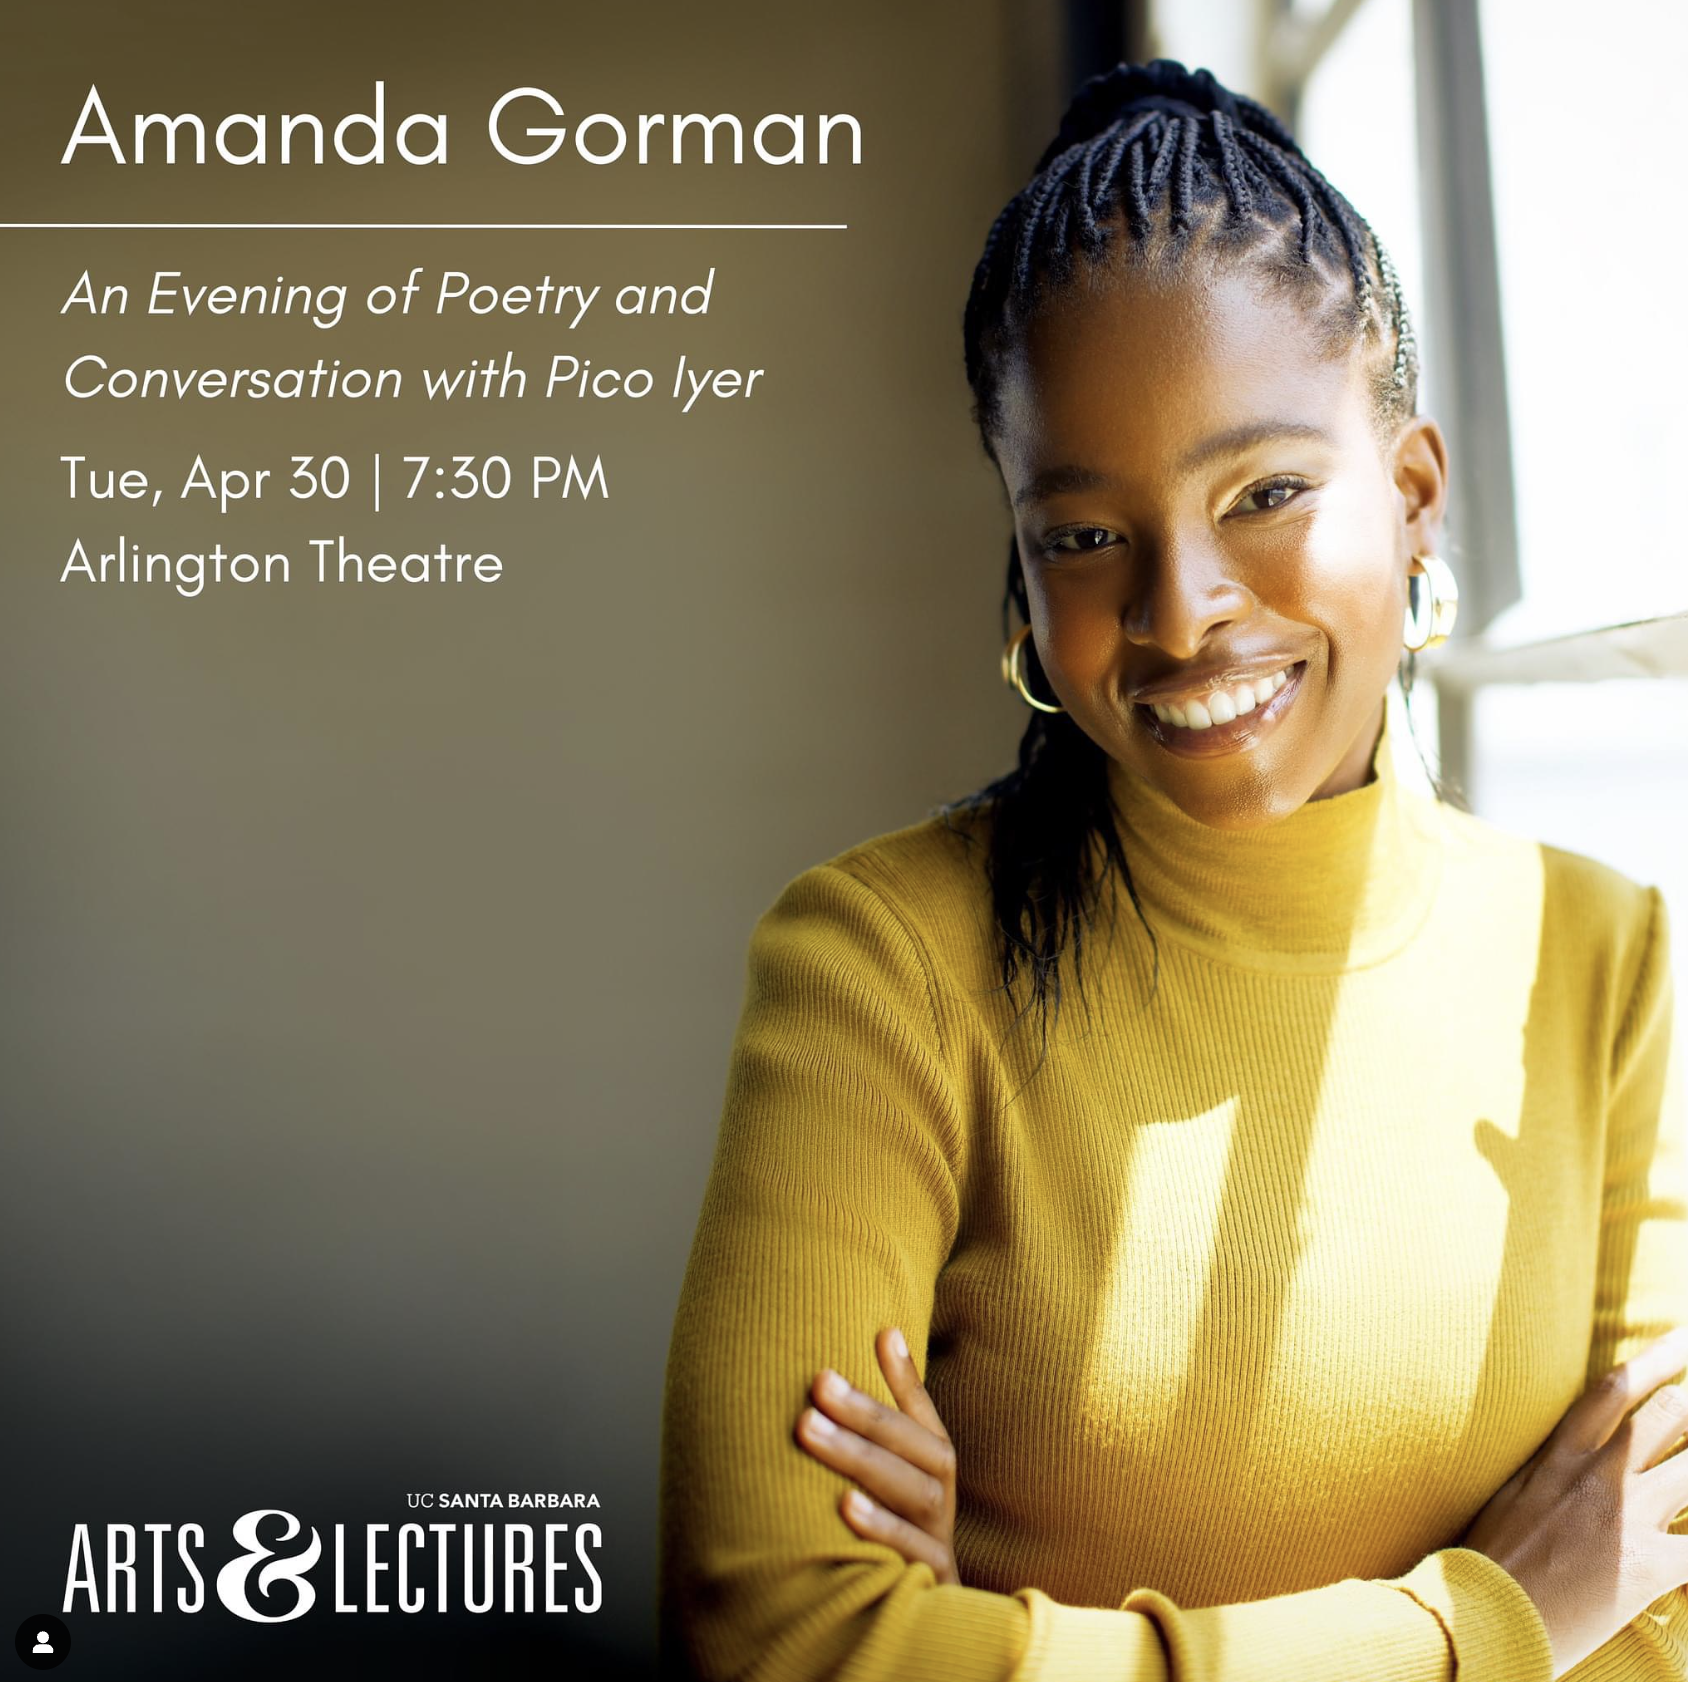 Amanda Gorman |An Evening of Poetry and Conversation with Pico Iyer